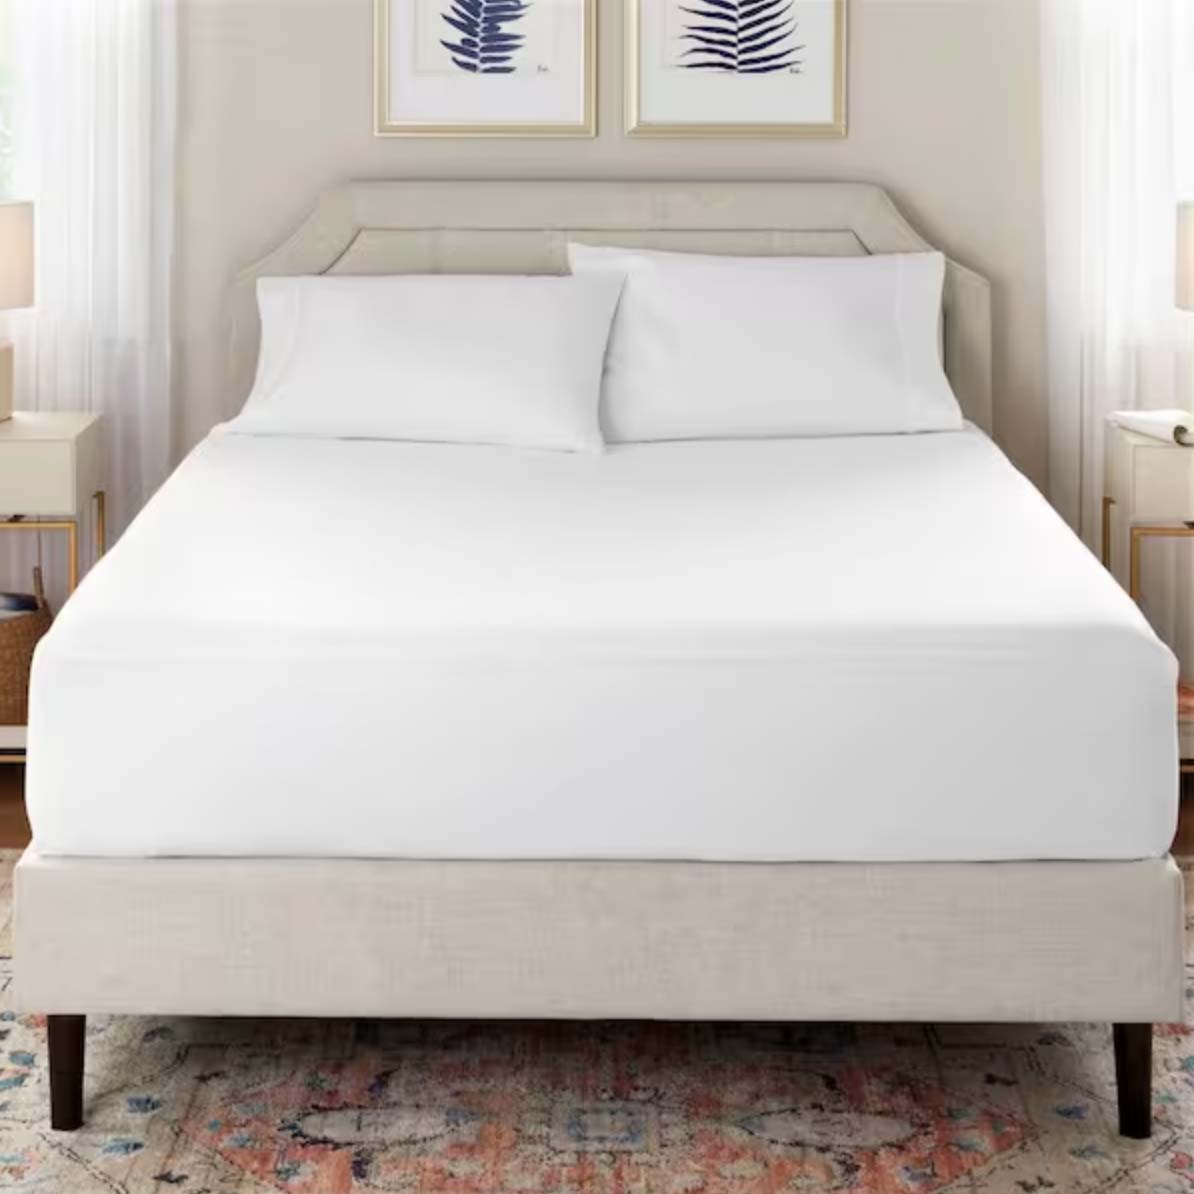 Stylewell Waterproof & Antimicrobial Fitted Full Mattress Protector on bed with gray frame